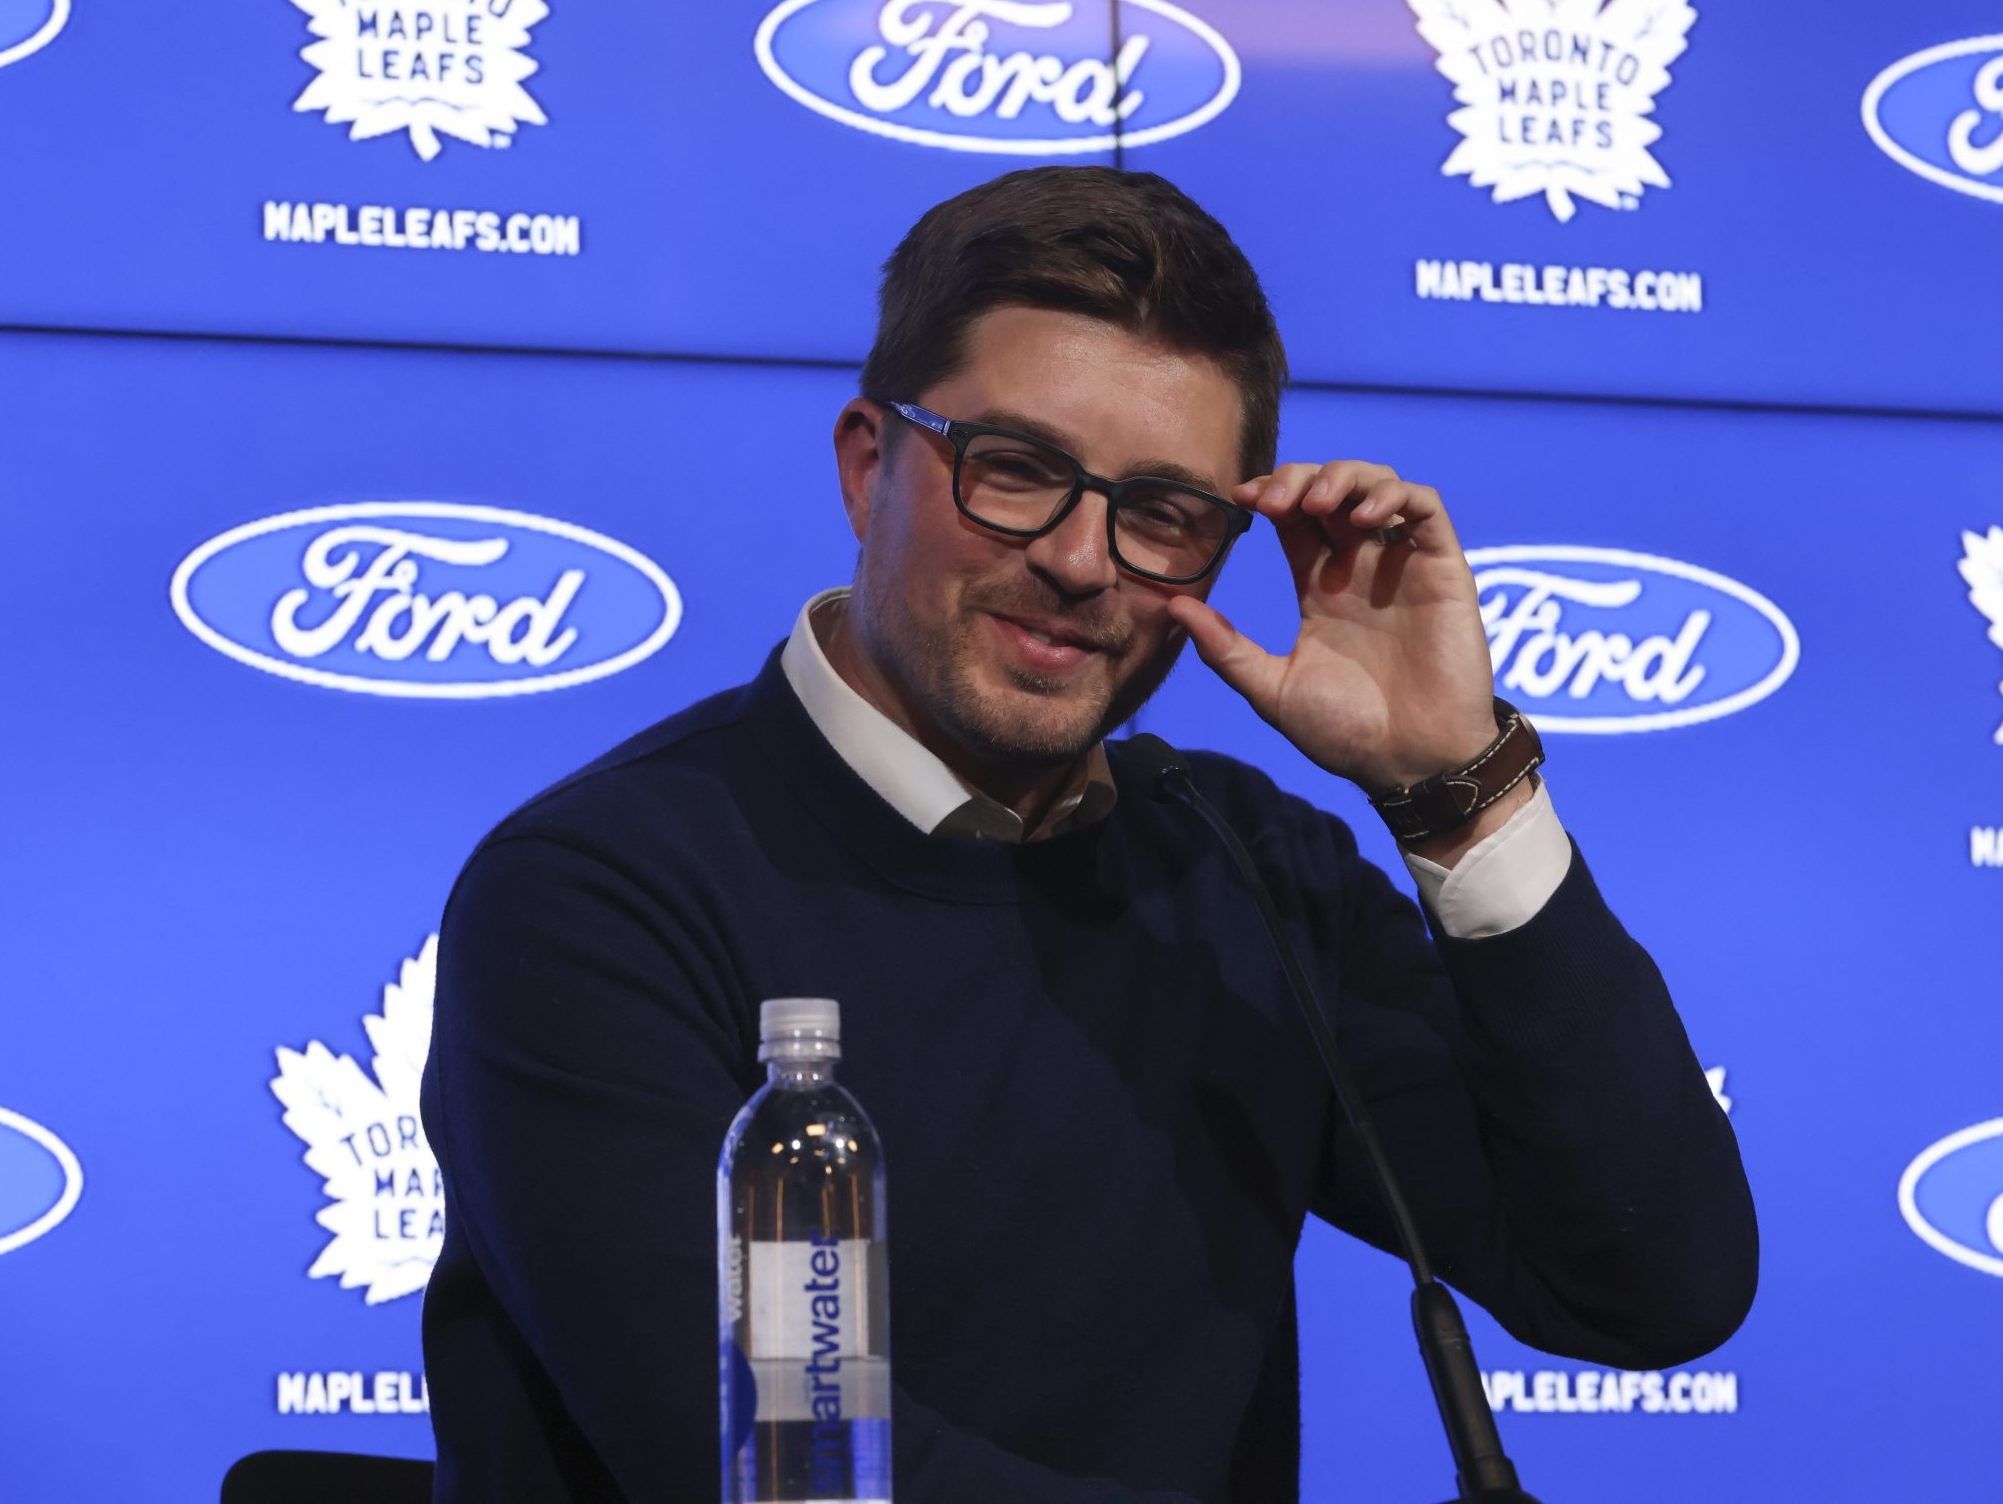 Leaf notes Kyle Dubas to Pittsburgh could be back on Toronto